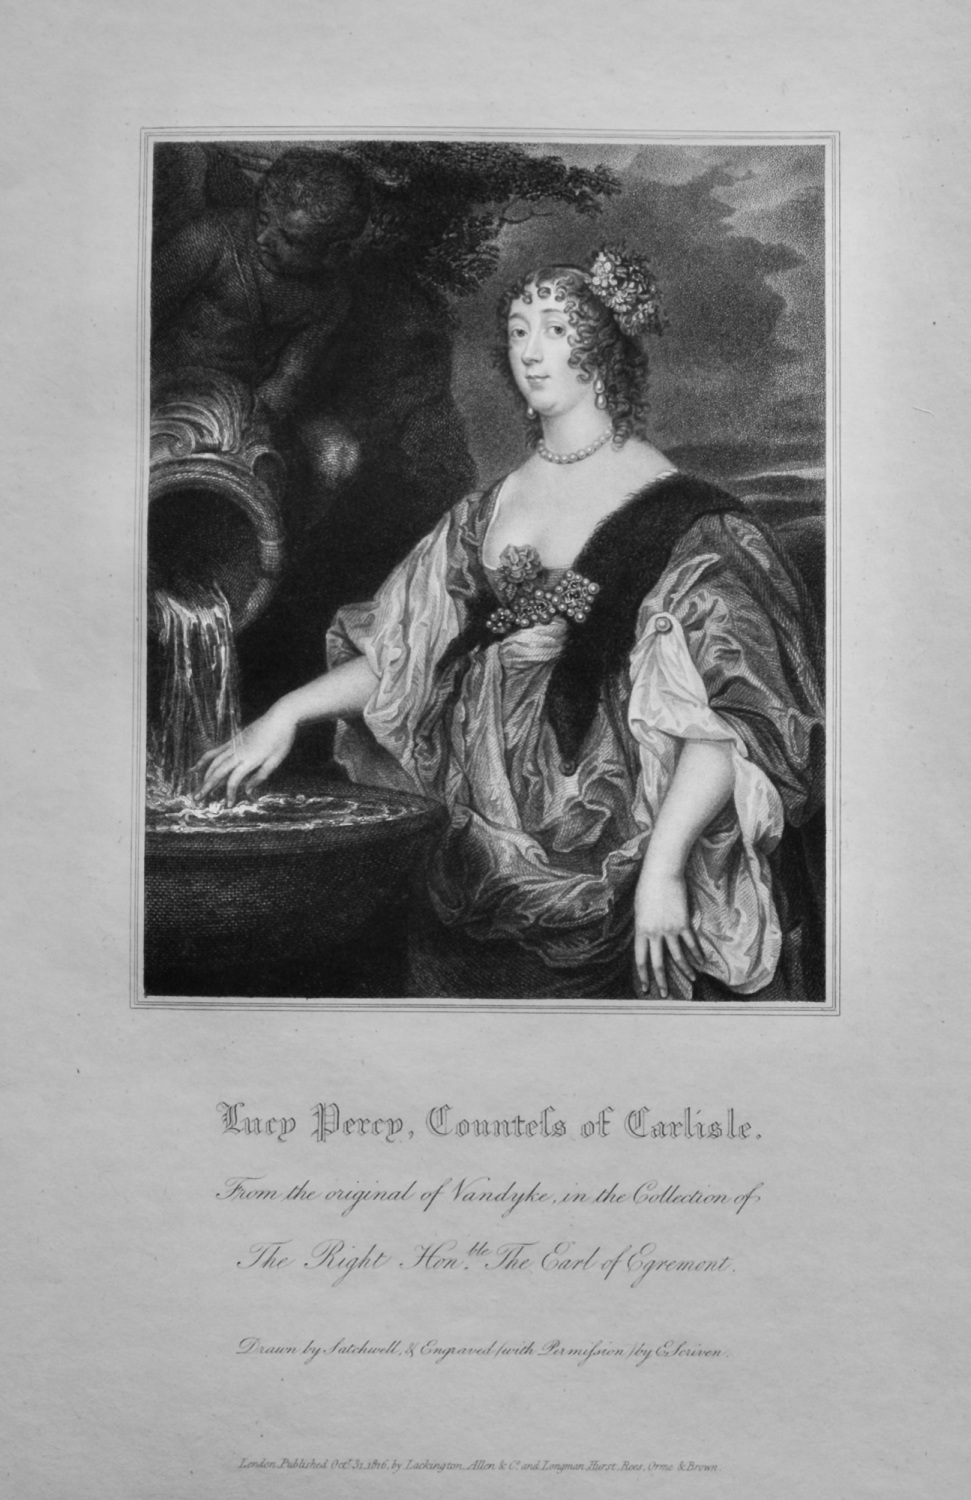 Lucy Perry, Countess of Carlisle.   1821.